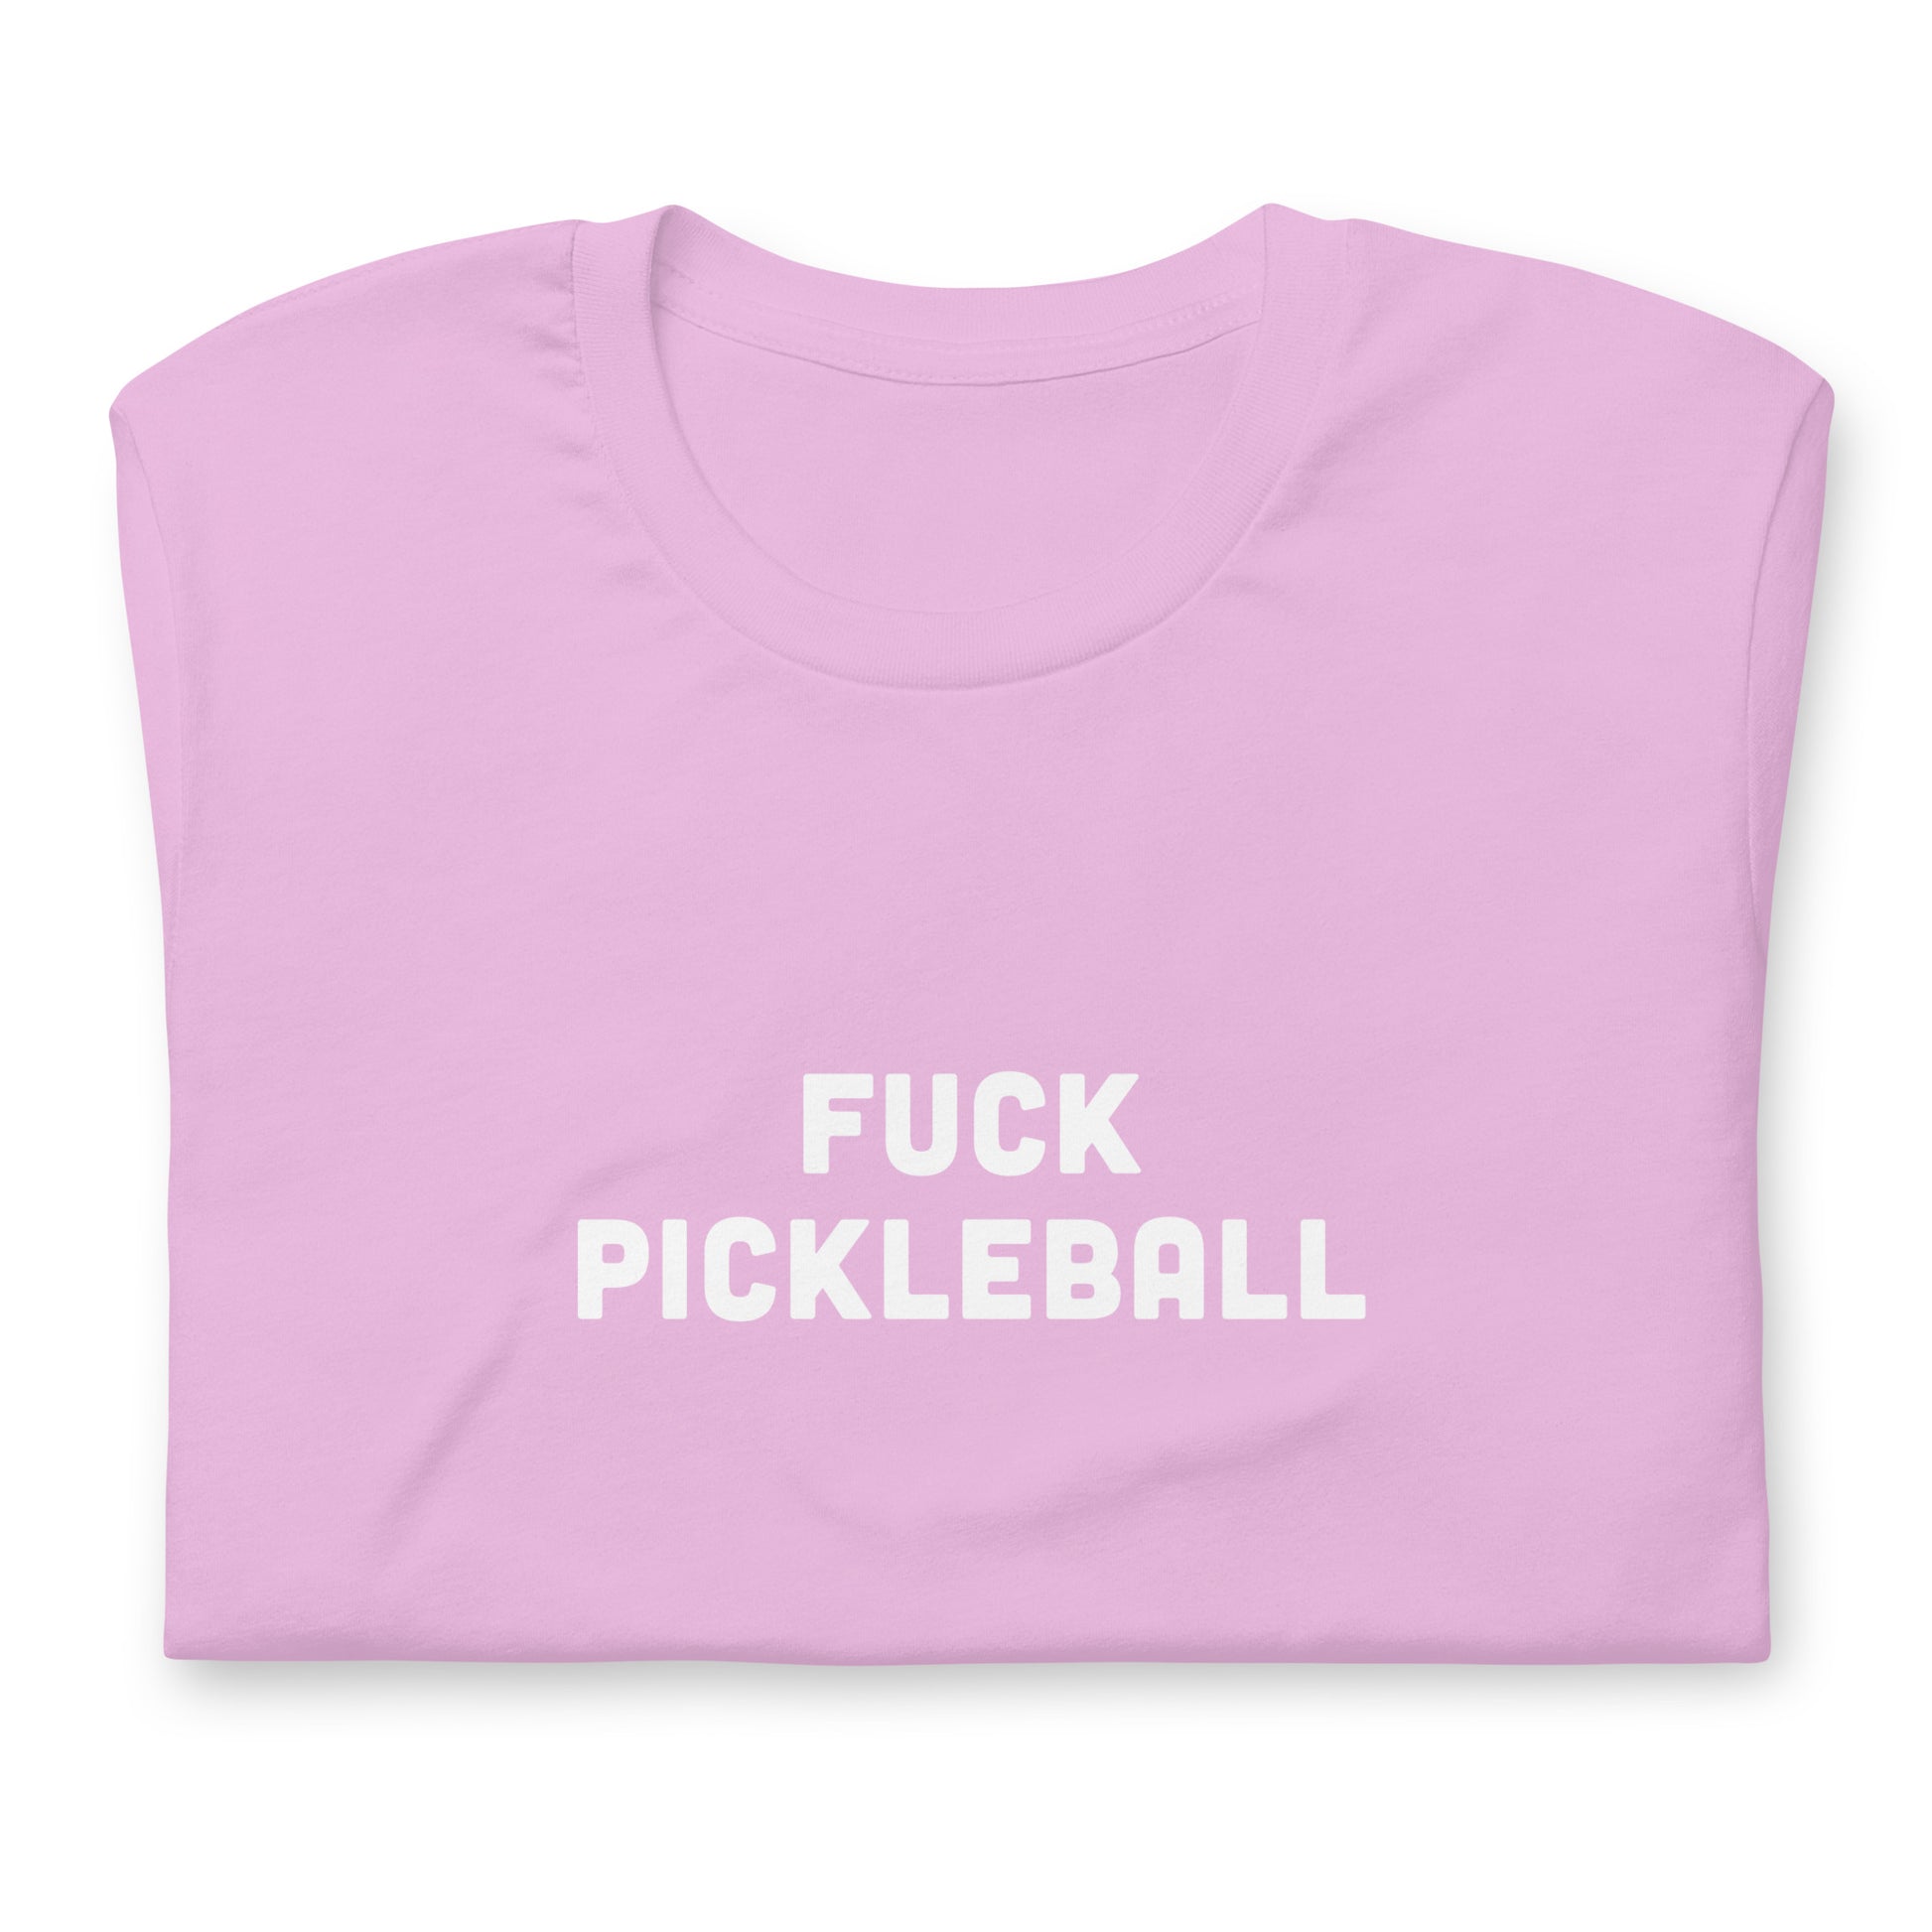 Fuck Pickleball T-Shirt Size XL Color Forest